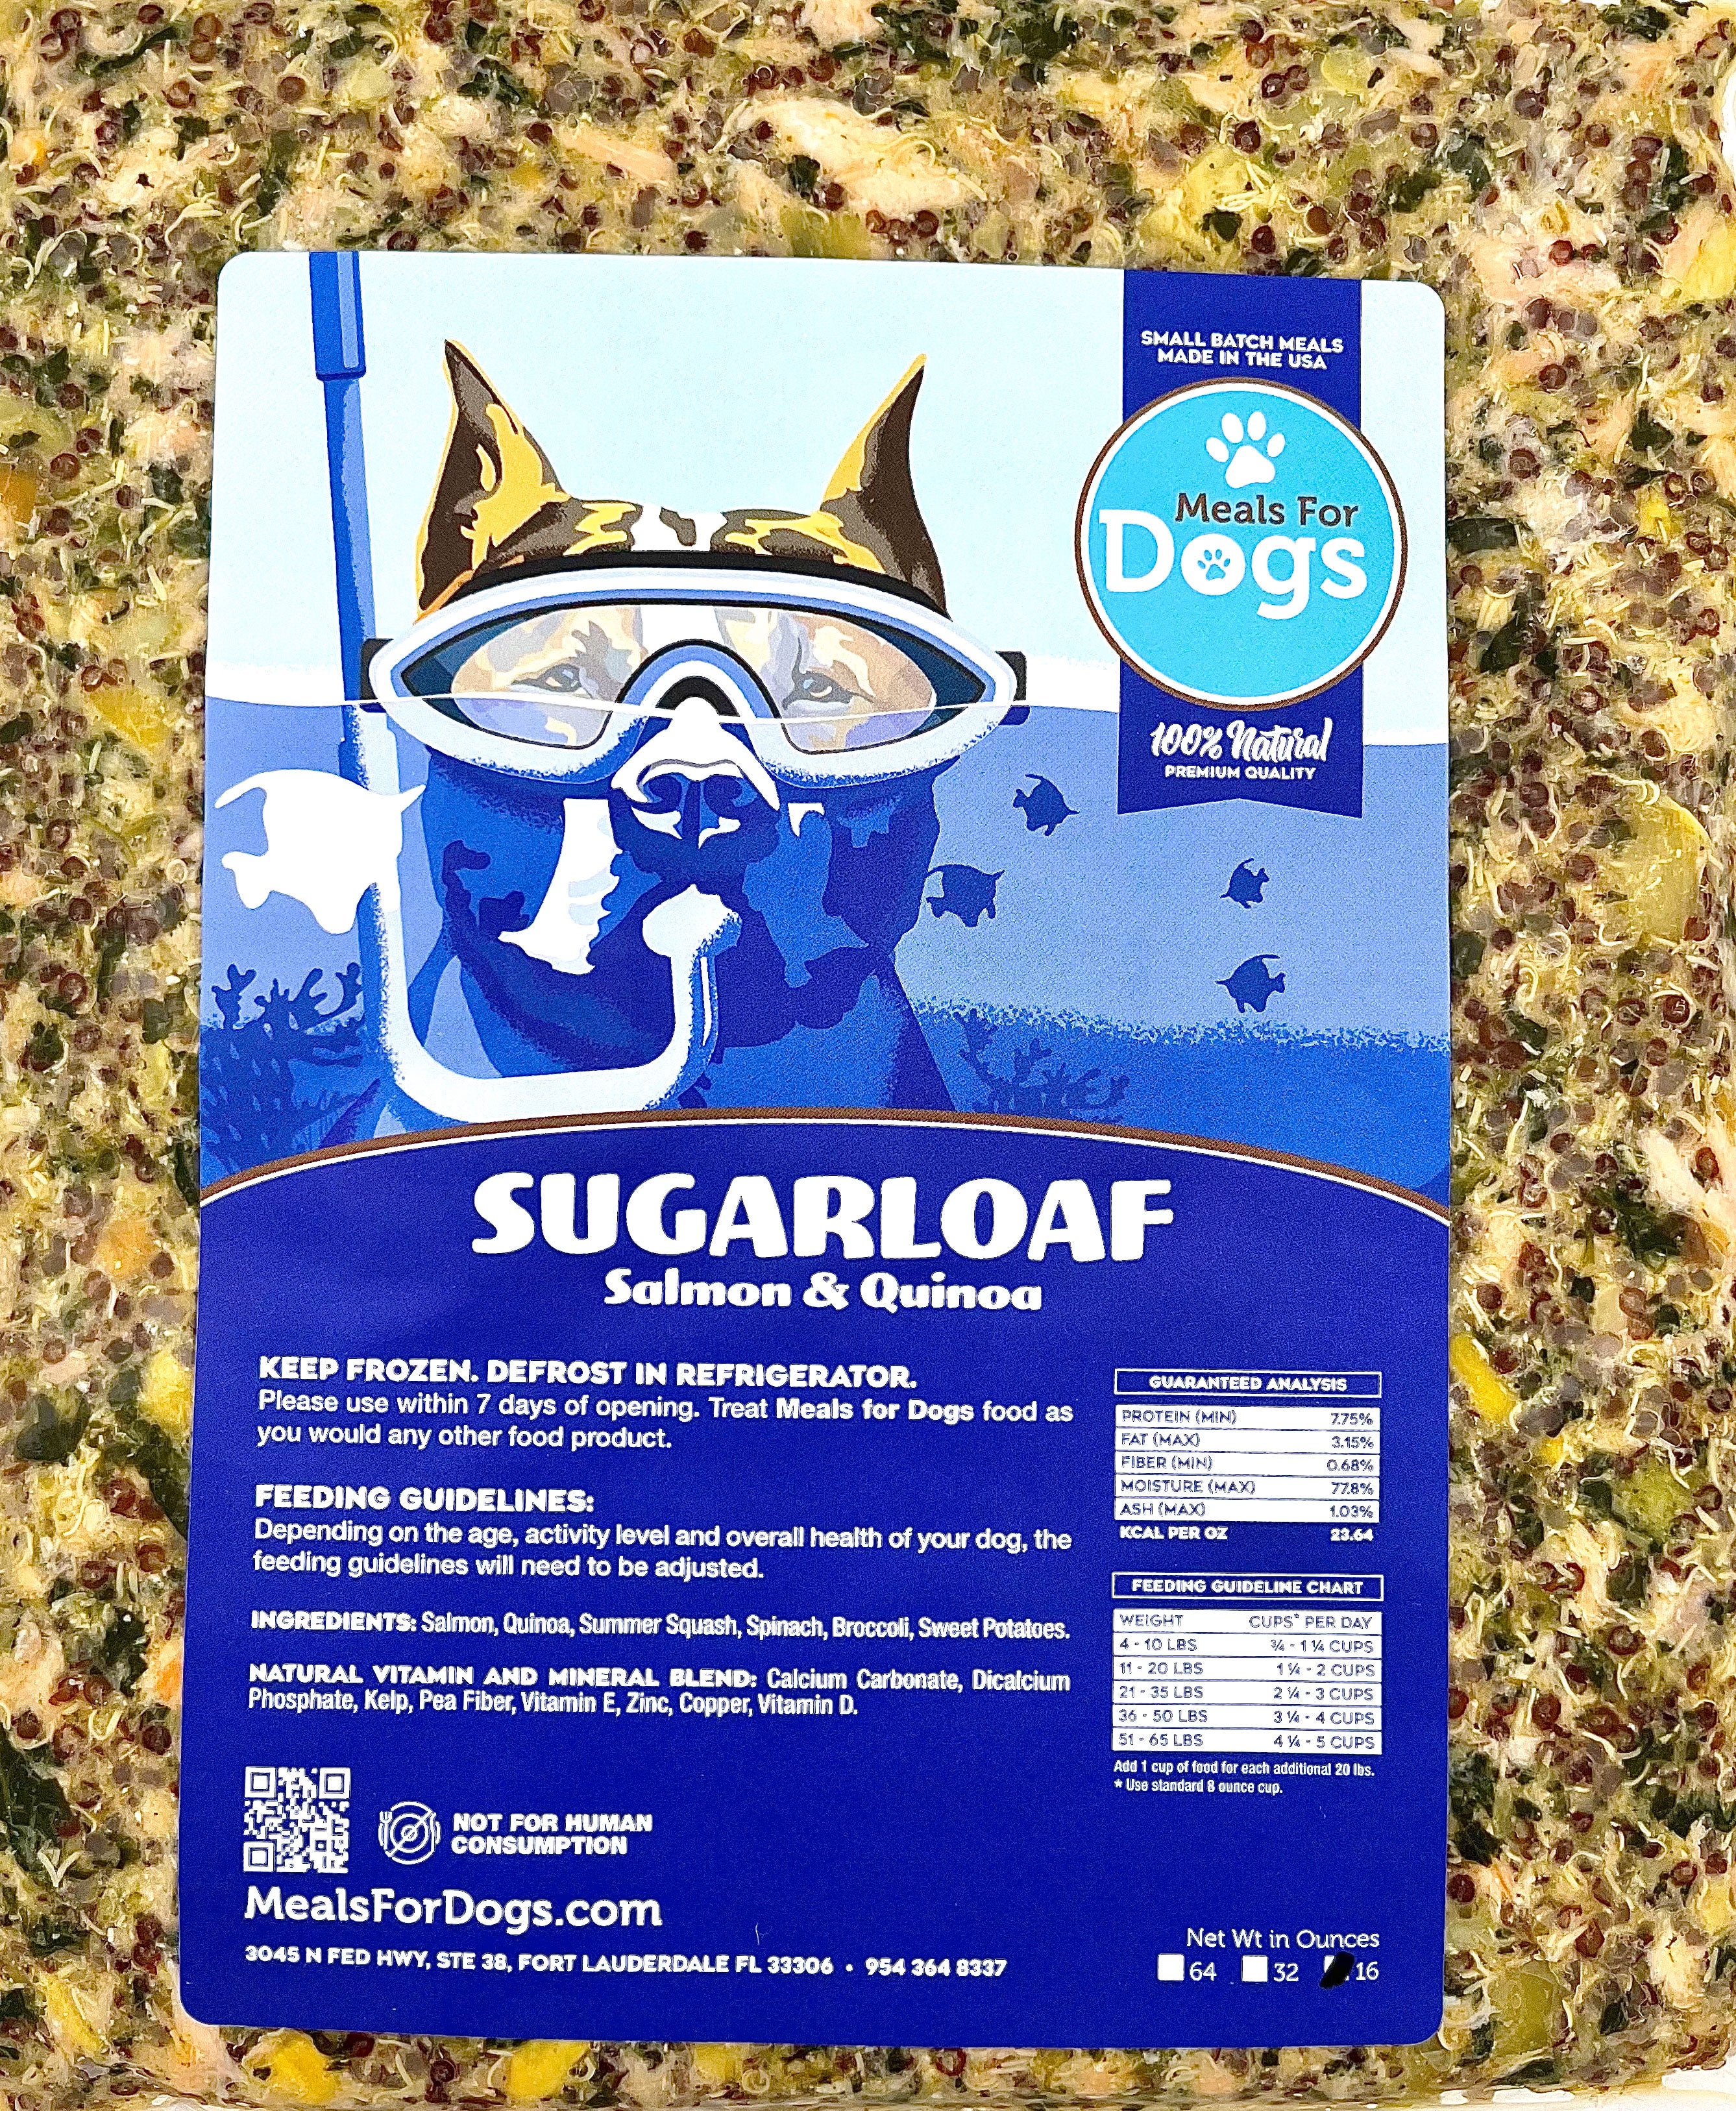 Sugarloaf Salmon & Quinoa Meal |Meals for Dogs